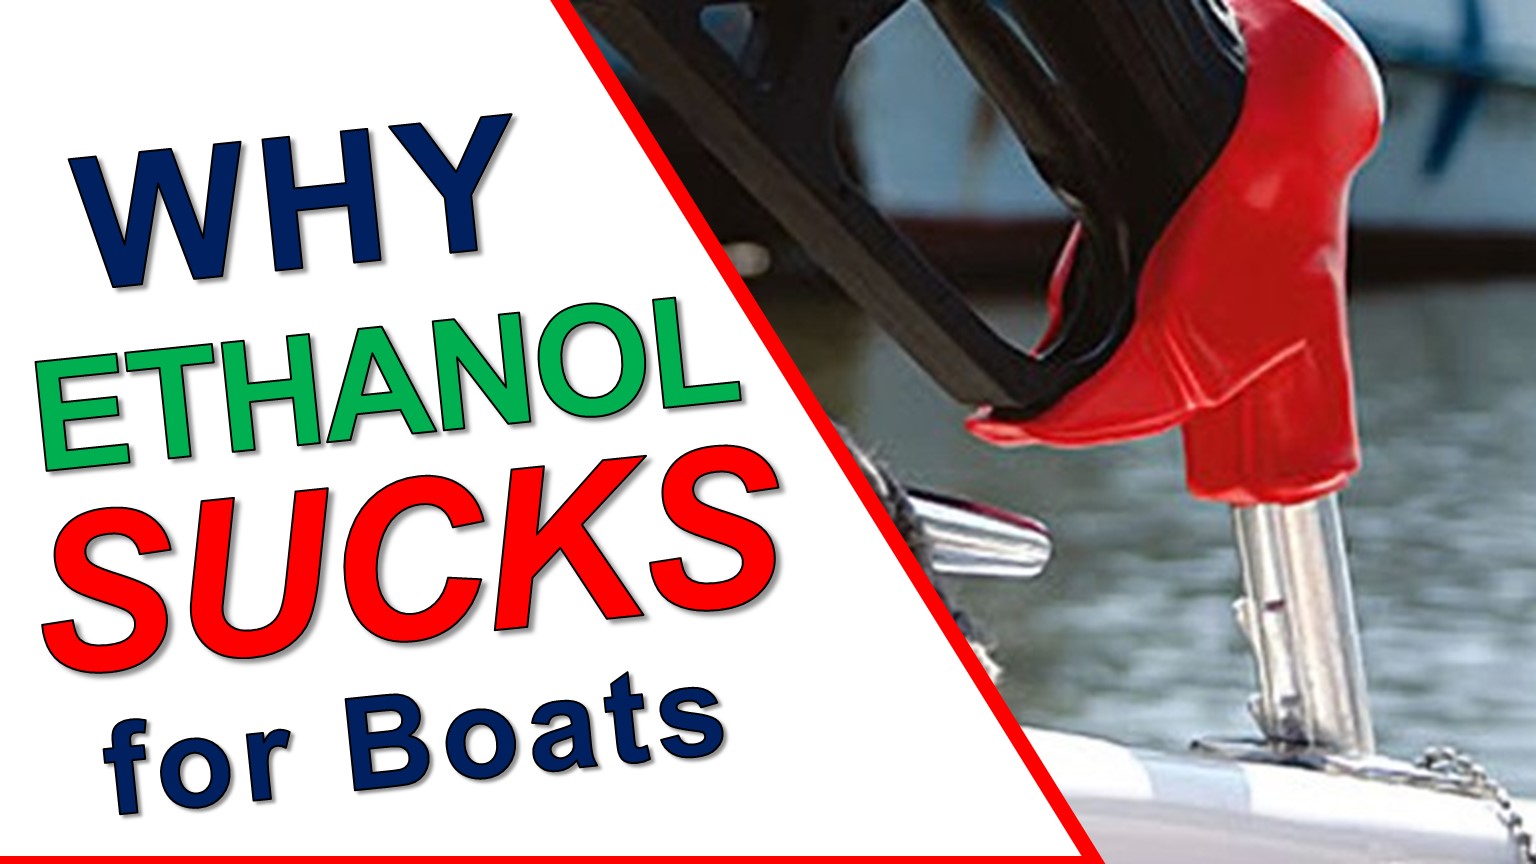 Is Ethanol Bad for Your Boats Engine?